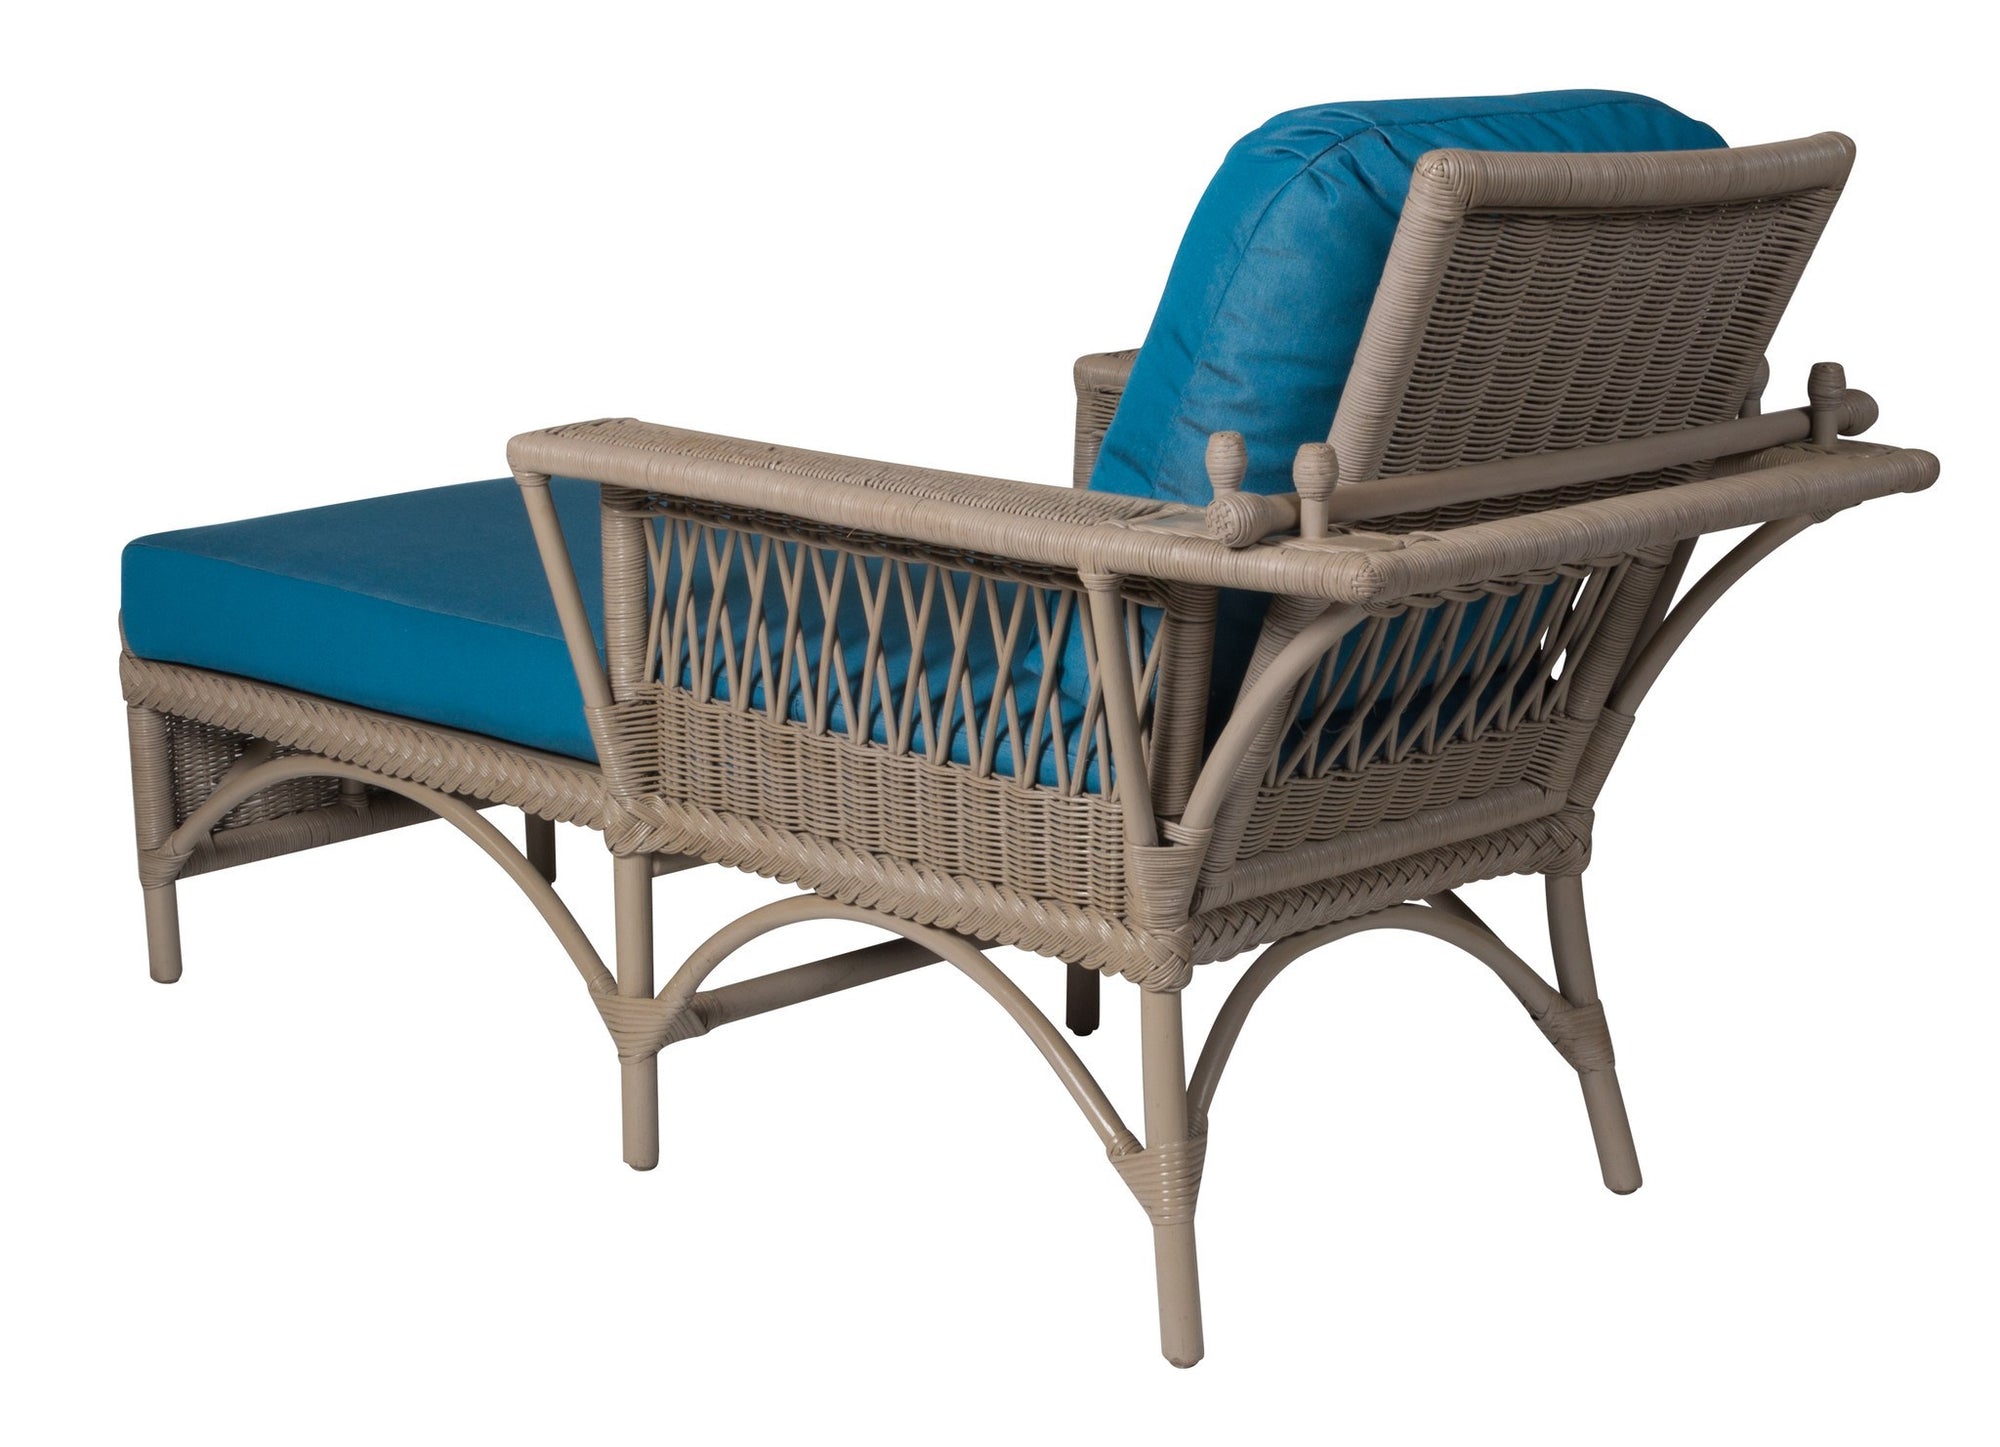 Designer Wicker & Rattan By Tribor Windsor Chaise With Adjustable Back by Design Wicker from Tribor Lounge Chair - Rattan Imports